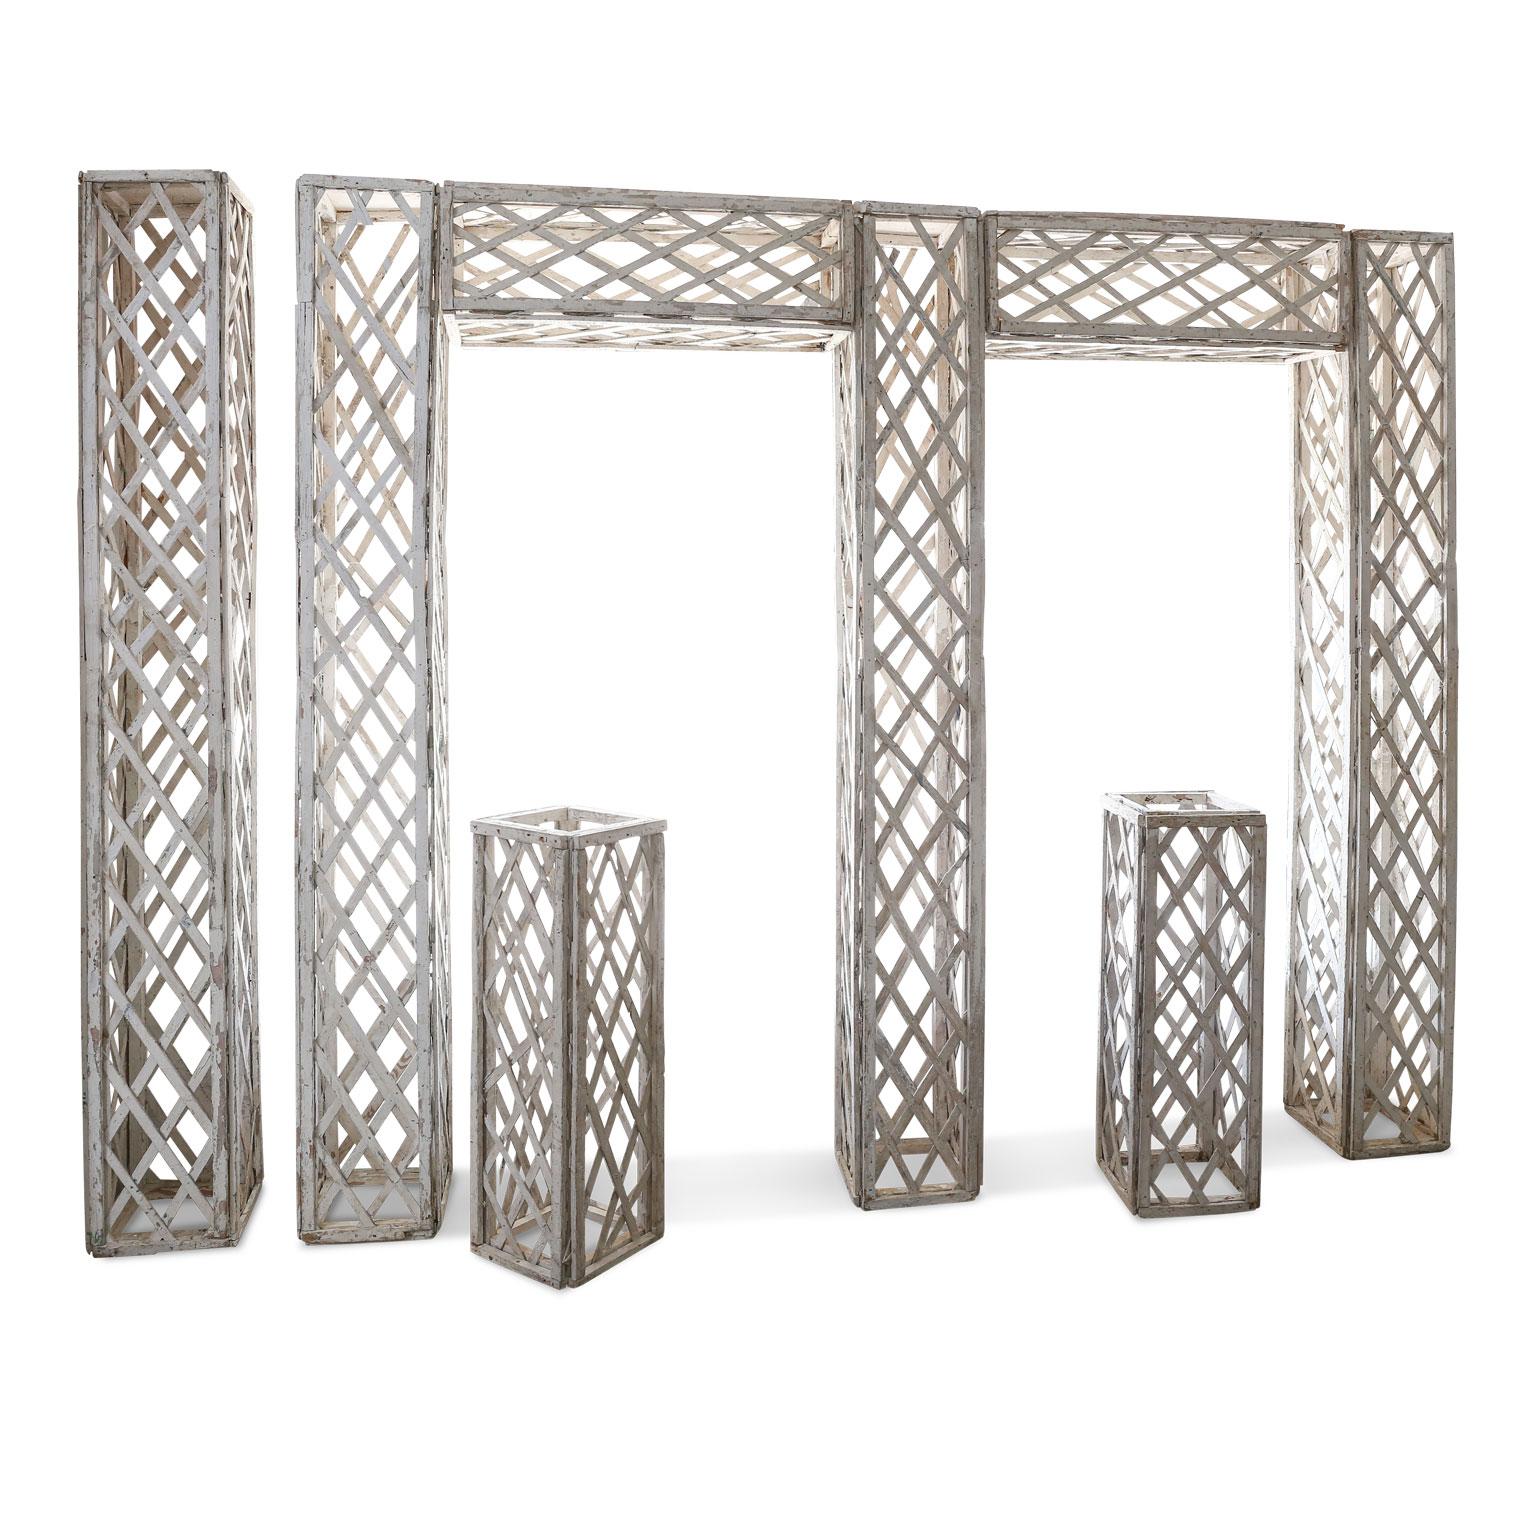 Vintage French white painted trellis (circa 1940) from a garden near Versailles. White painted wooden trellis is composed of eight sections which may be easily disassembled and recombined together into different formations or structures. Four